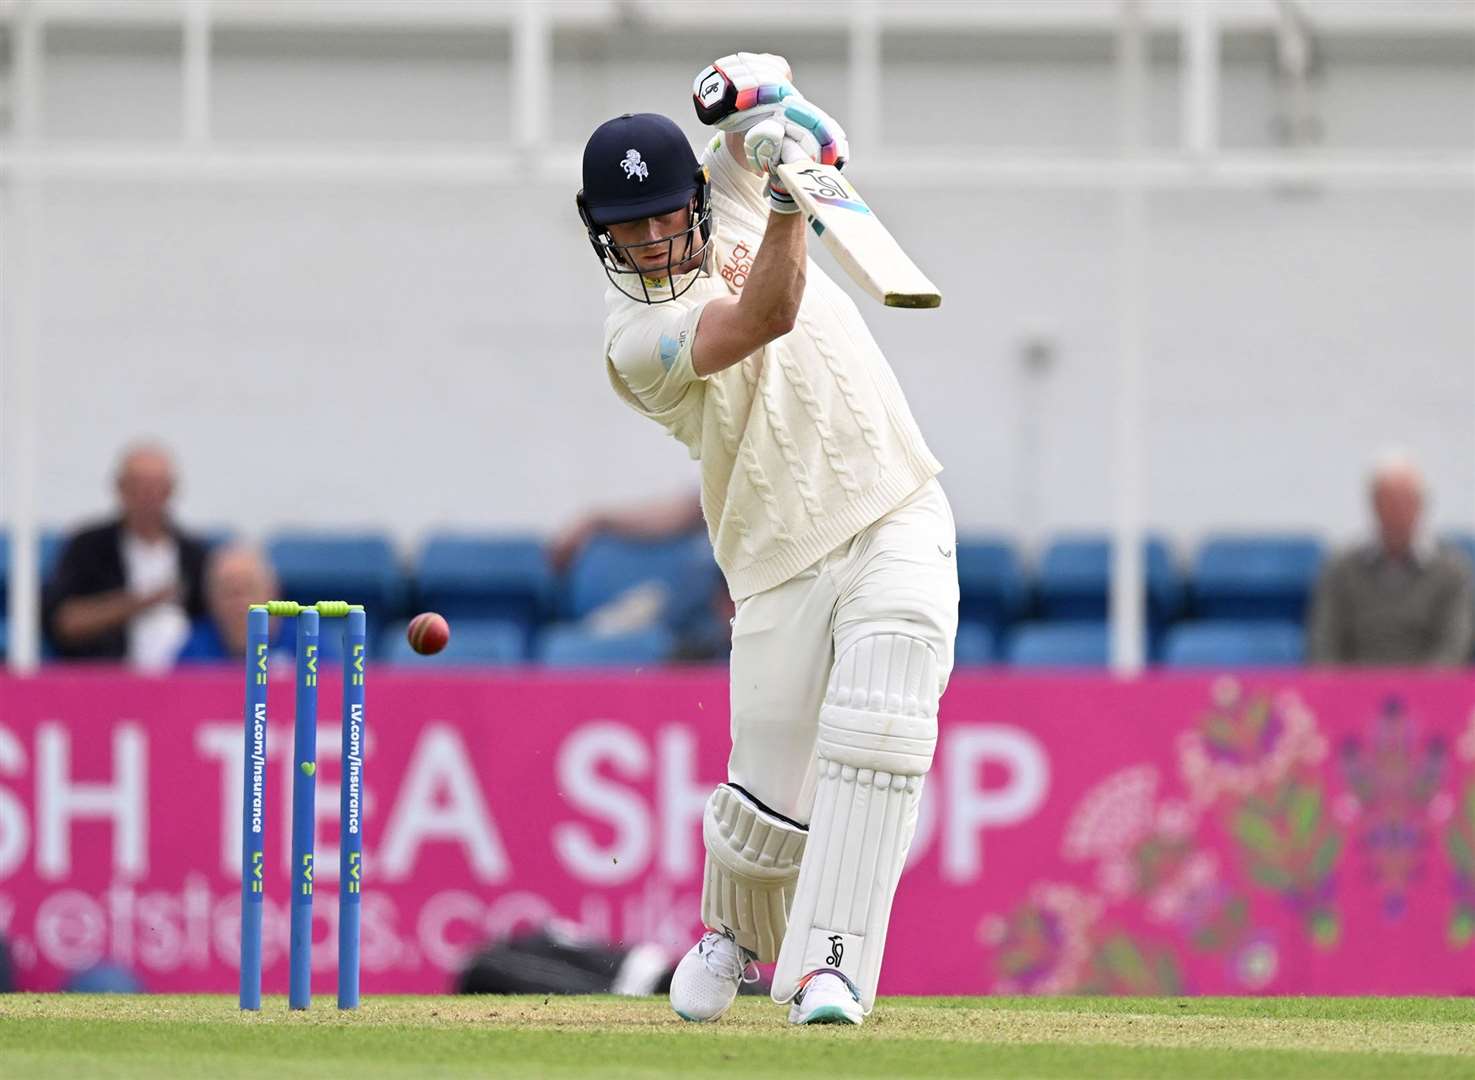 All-rounder Joey Evison – was 56 not out at the close of play as Kent edged back ahead of Essex in County Championship Division 1 at Chelmsford. Picture: Keith Gillard